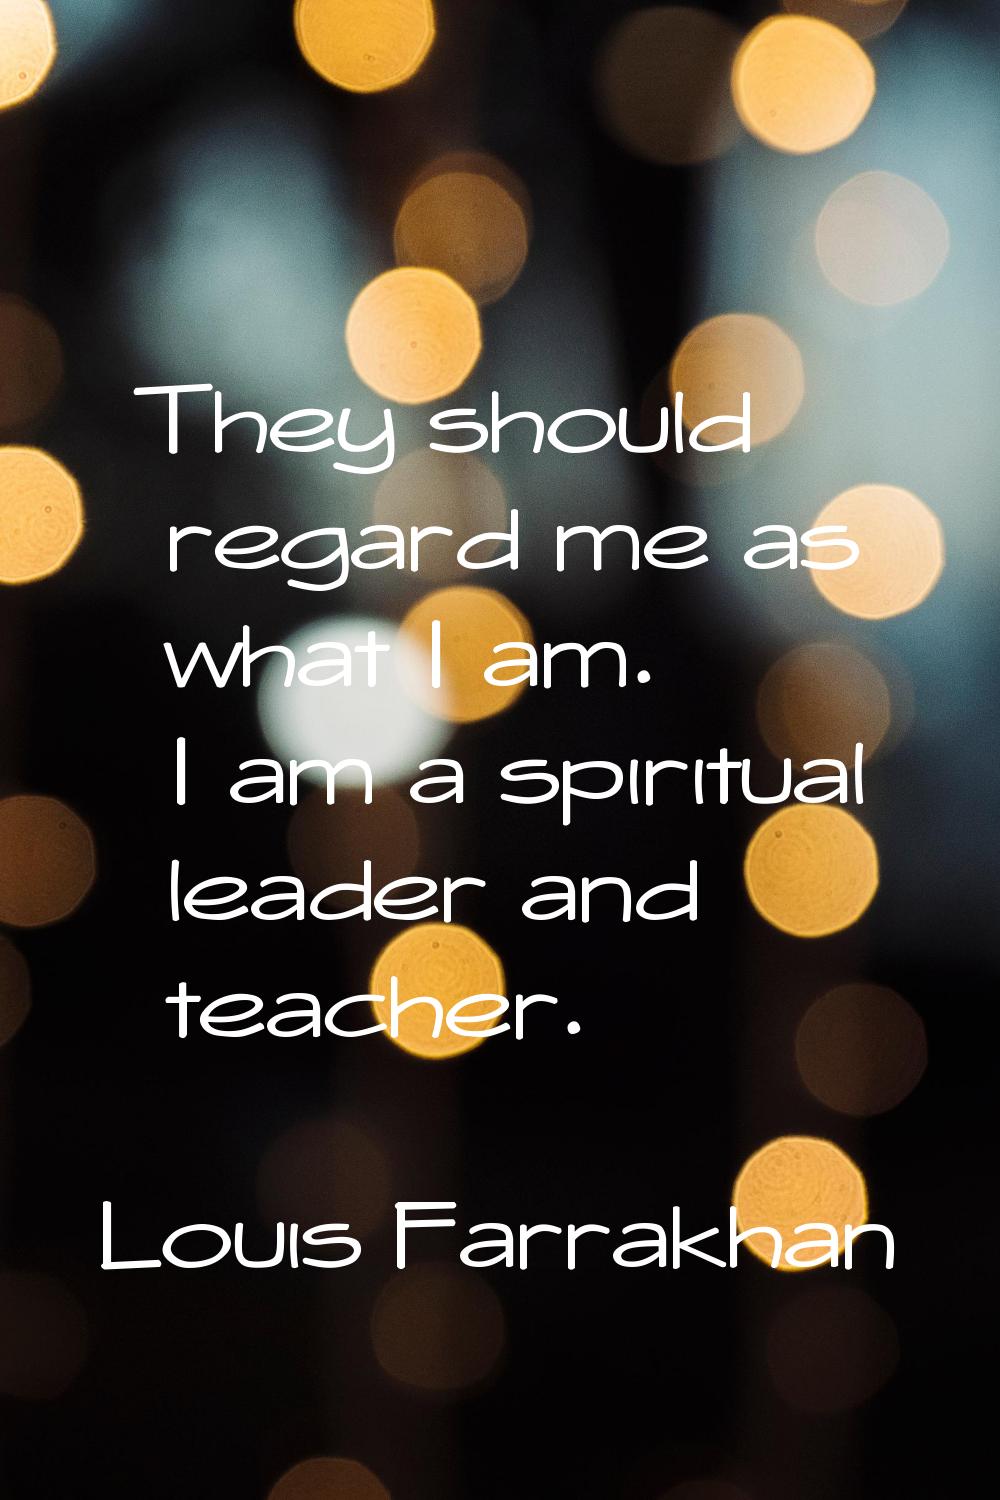 They should regard me as what I am. I am a spiritual leader and teacher.